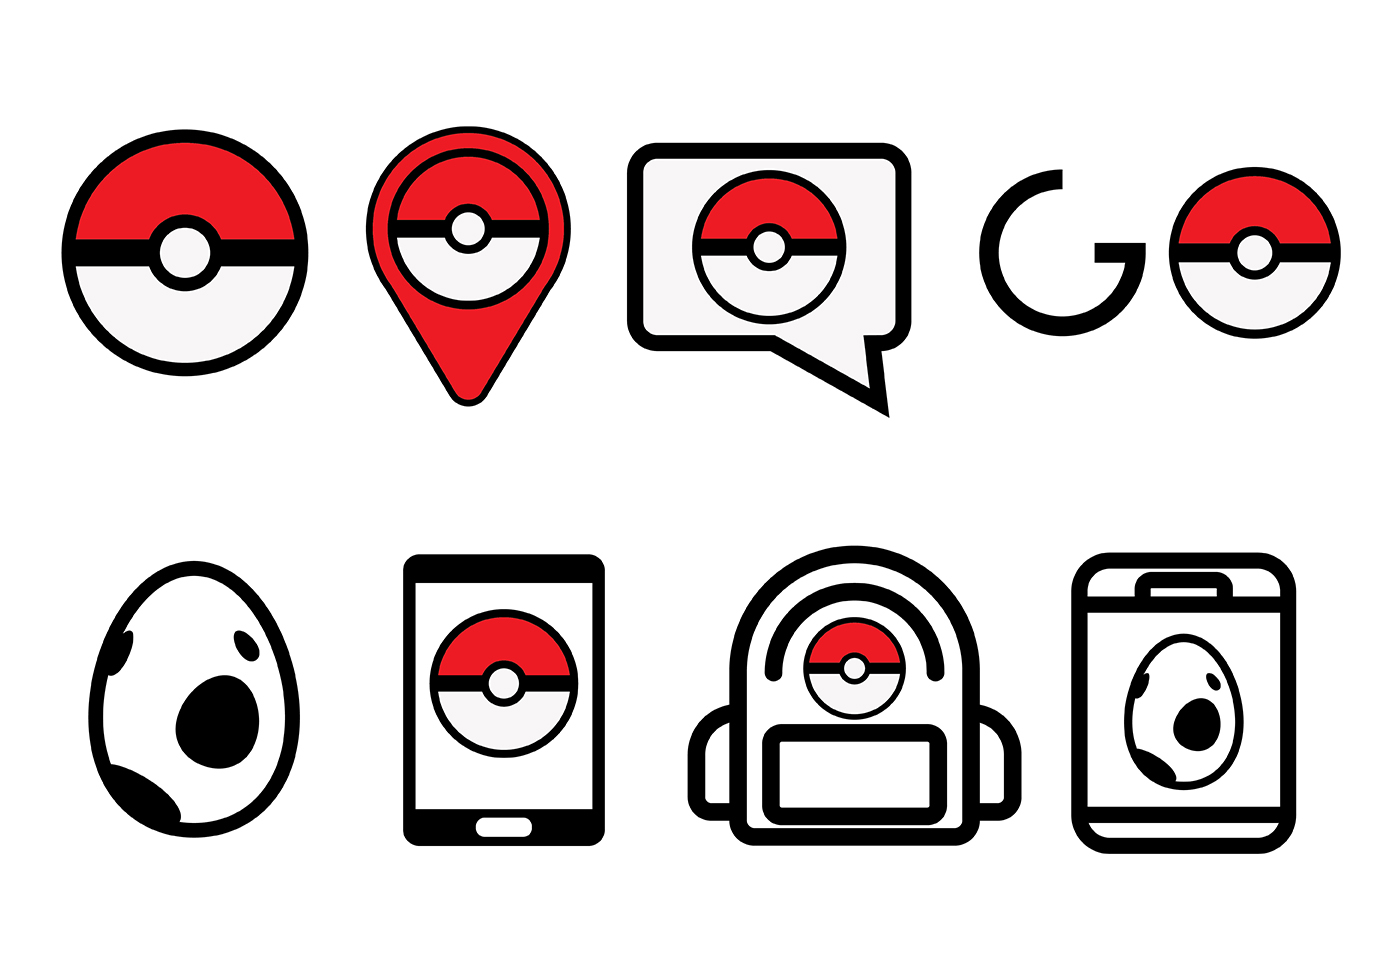 Pokemon Symbol Vector Images (over 140)